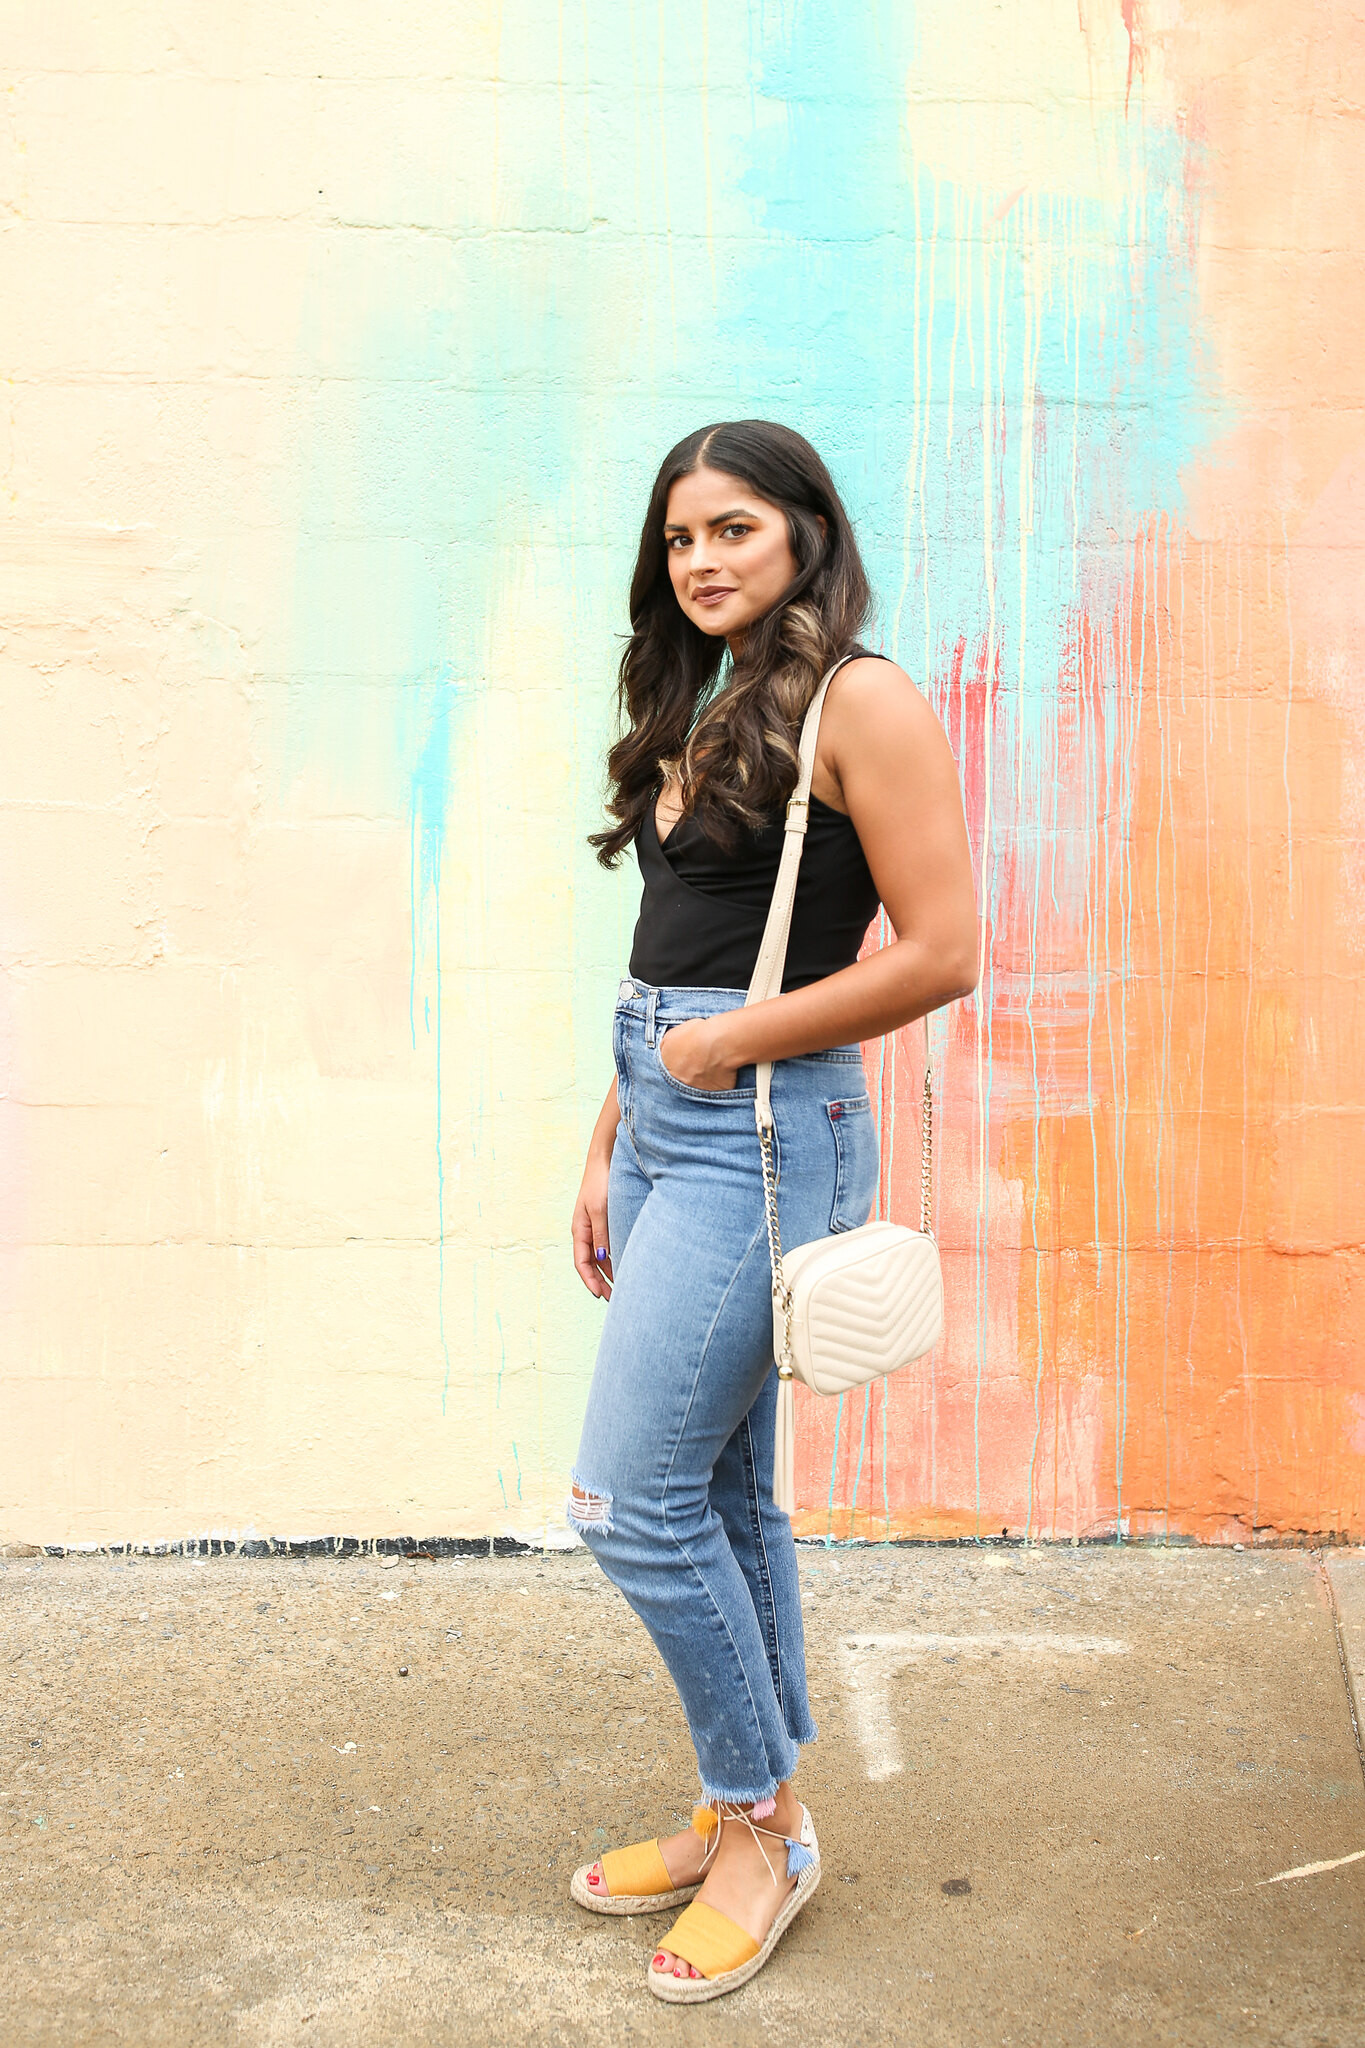 Priya the Blog, Nashville fashion blog, Nashville fashion blogger, Nashville style blog, Nashville style blogger, espadrilles, how to wear espadrilles, espadrille outfit, Urban Outfitters Girlfriend Jeans, late Summer outfit, Nashville mural, lace-up tassel espadrilles